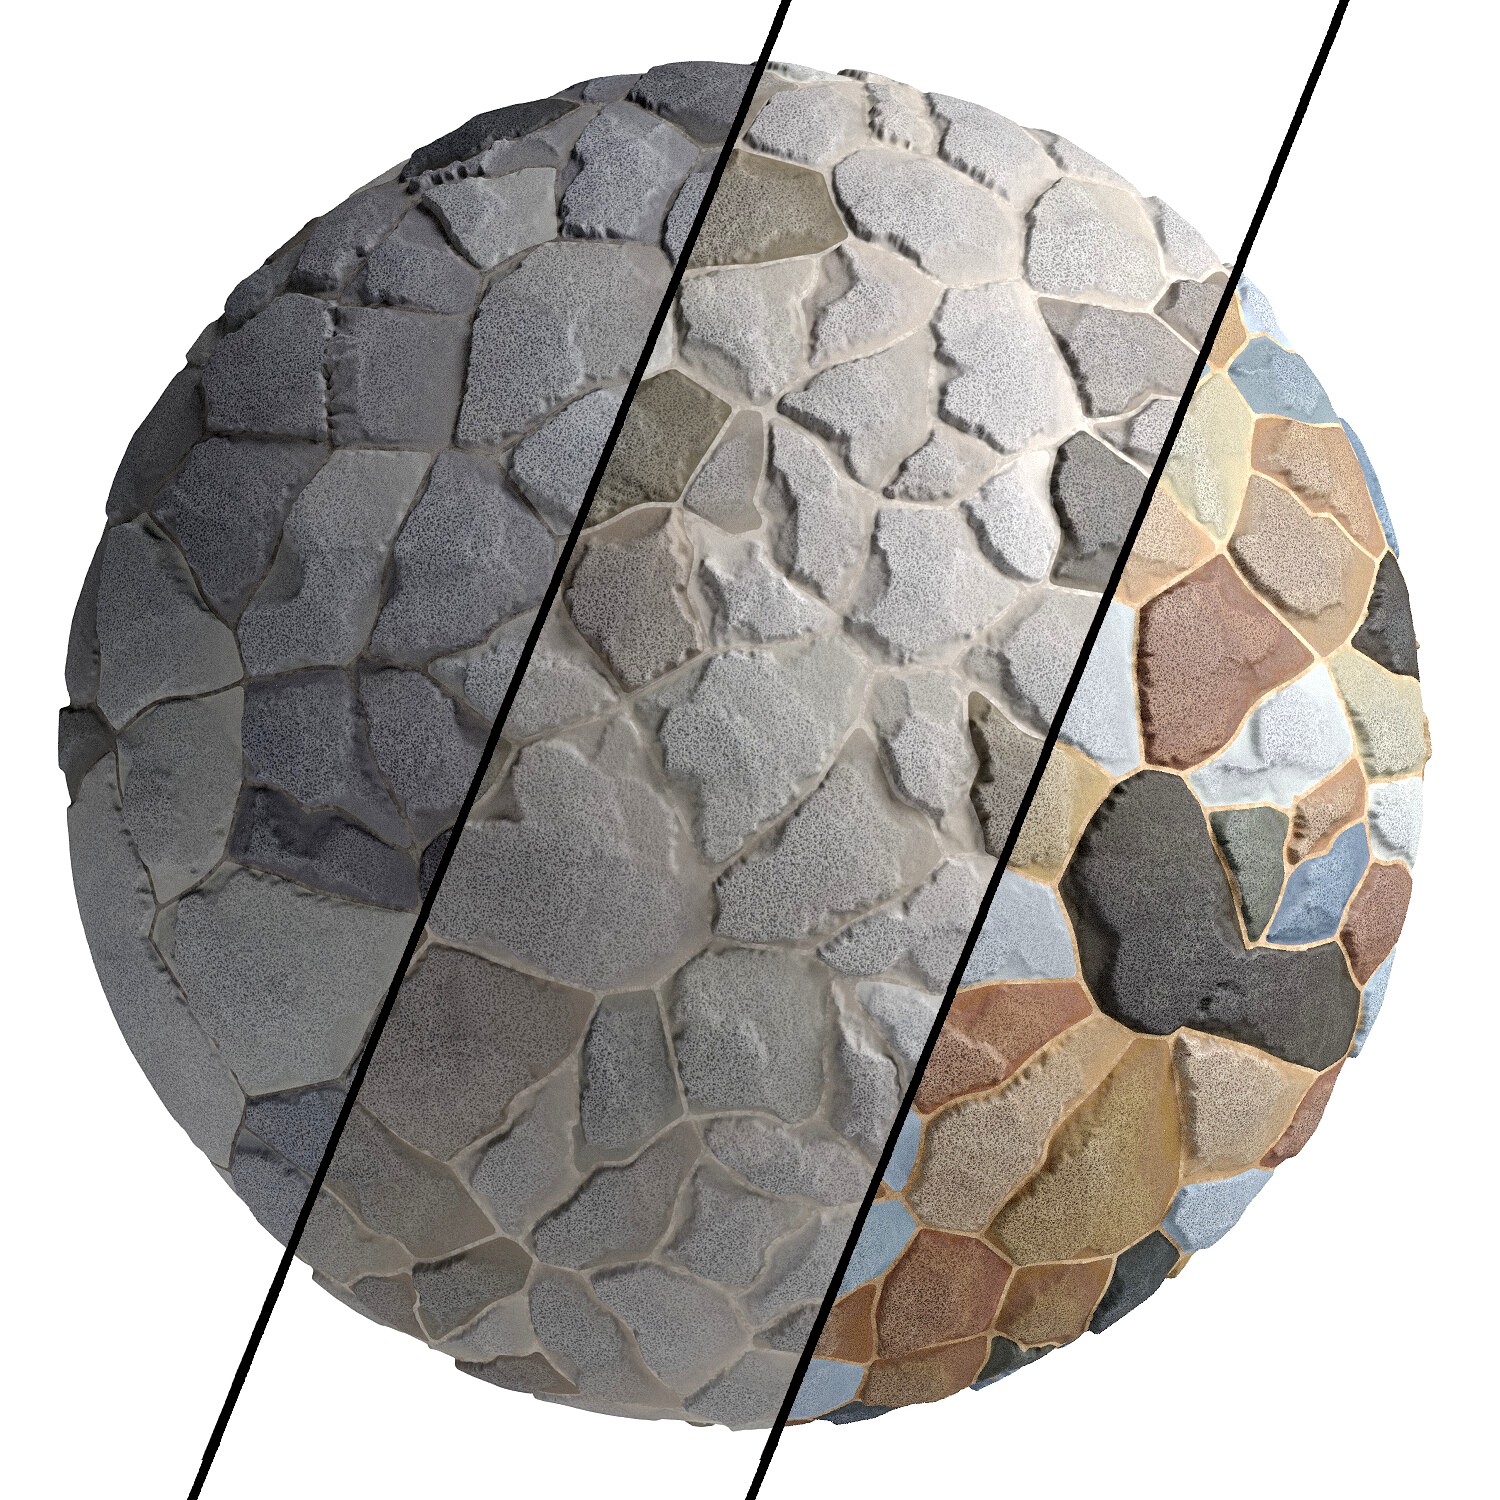 Ston Wall Material 2 - By 3 Color, Pbr By Sbsar, 4